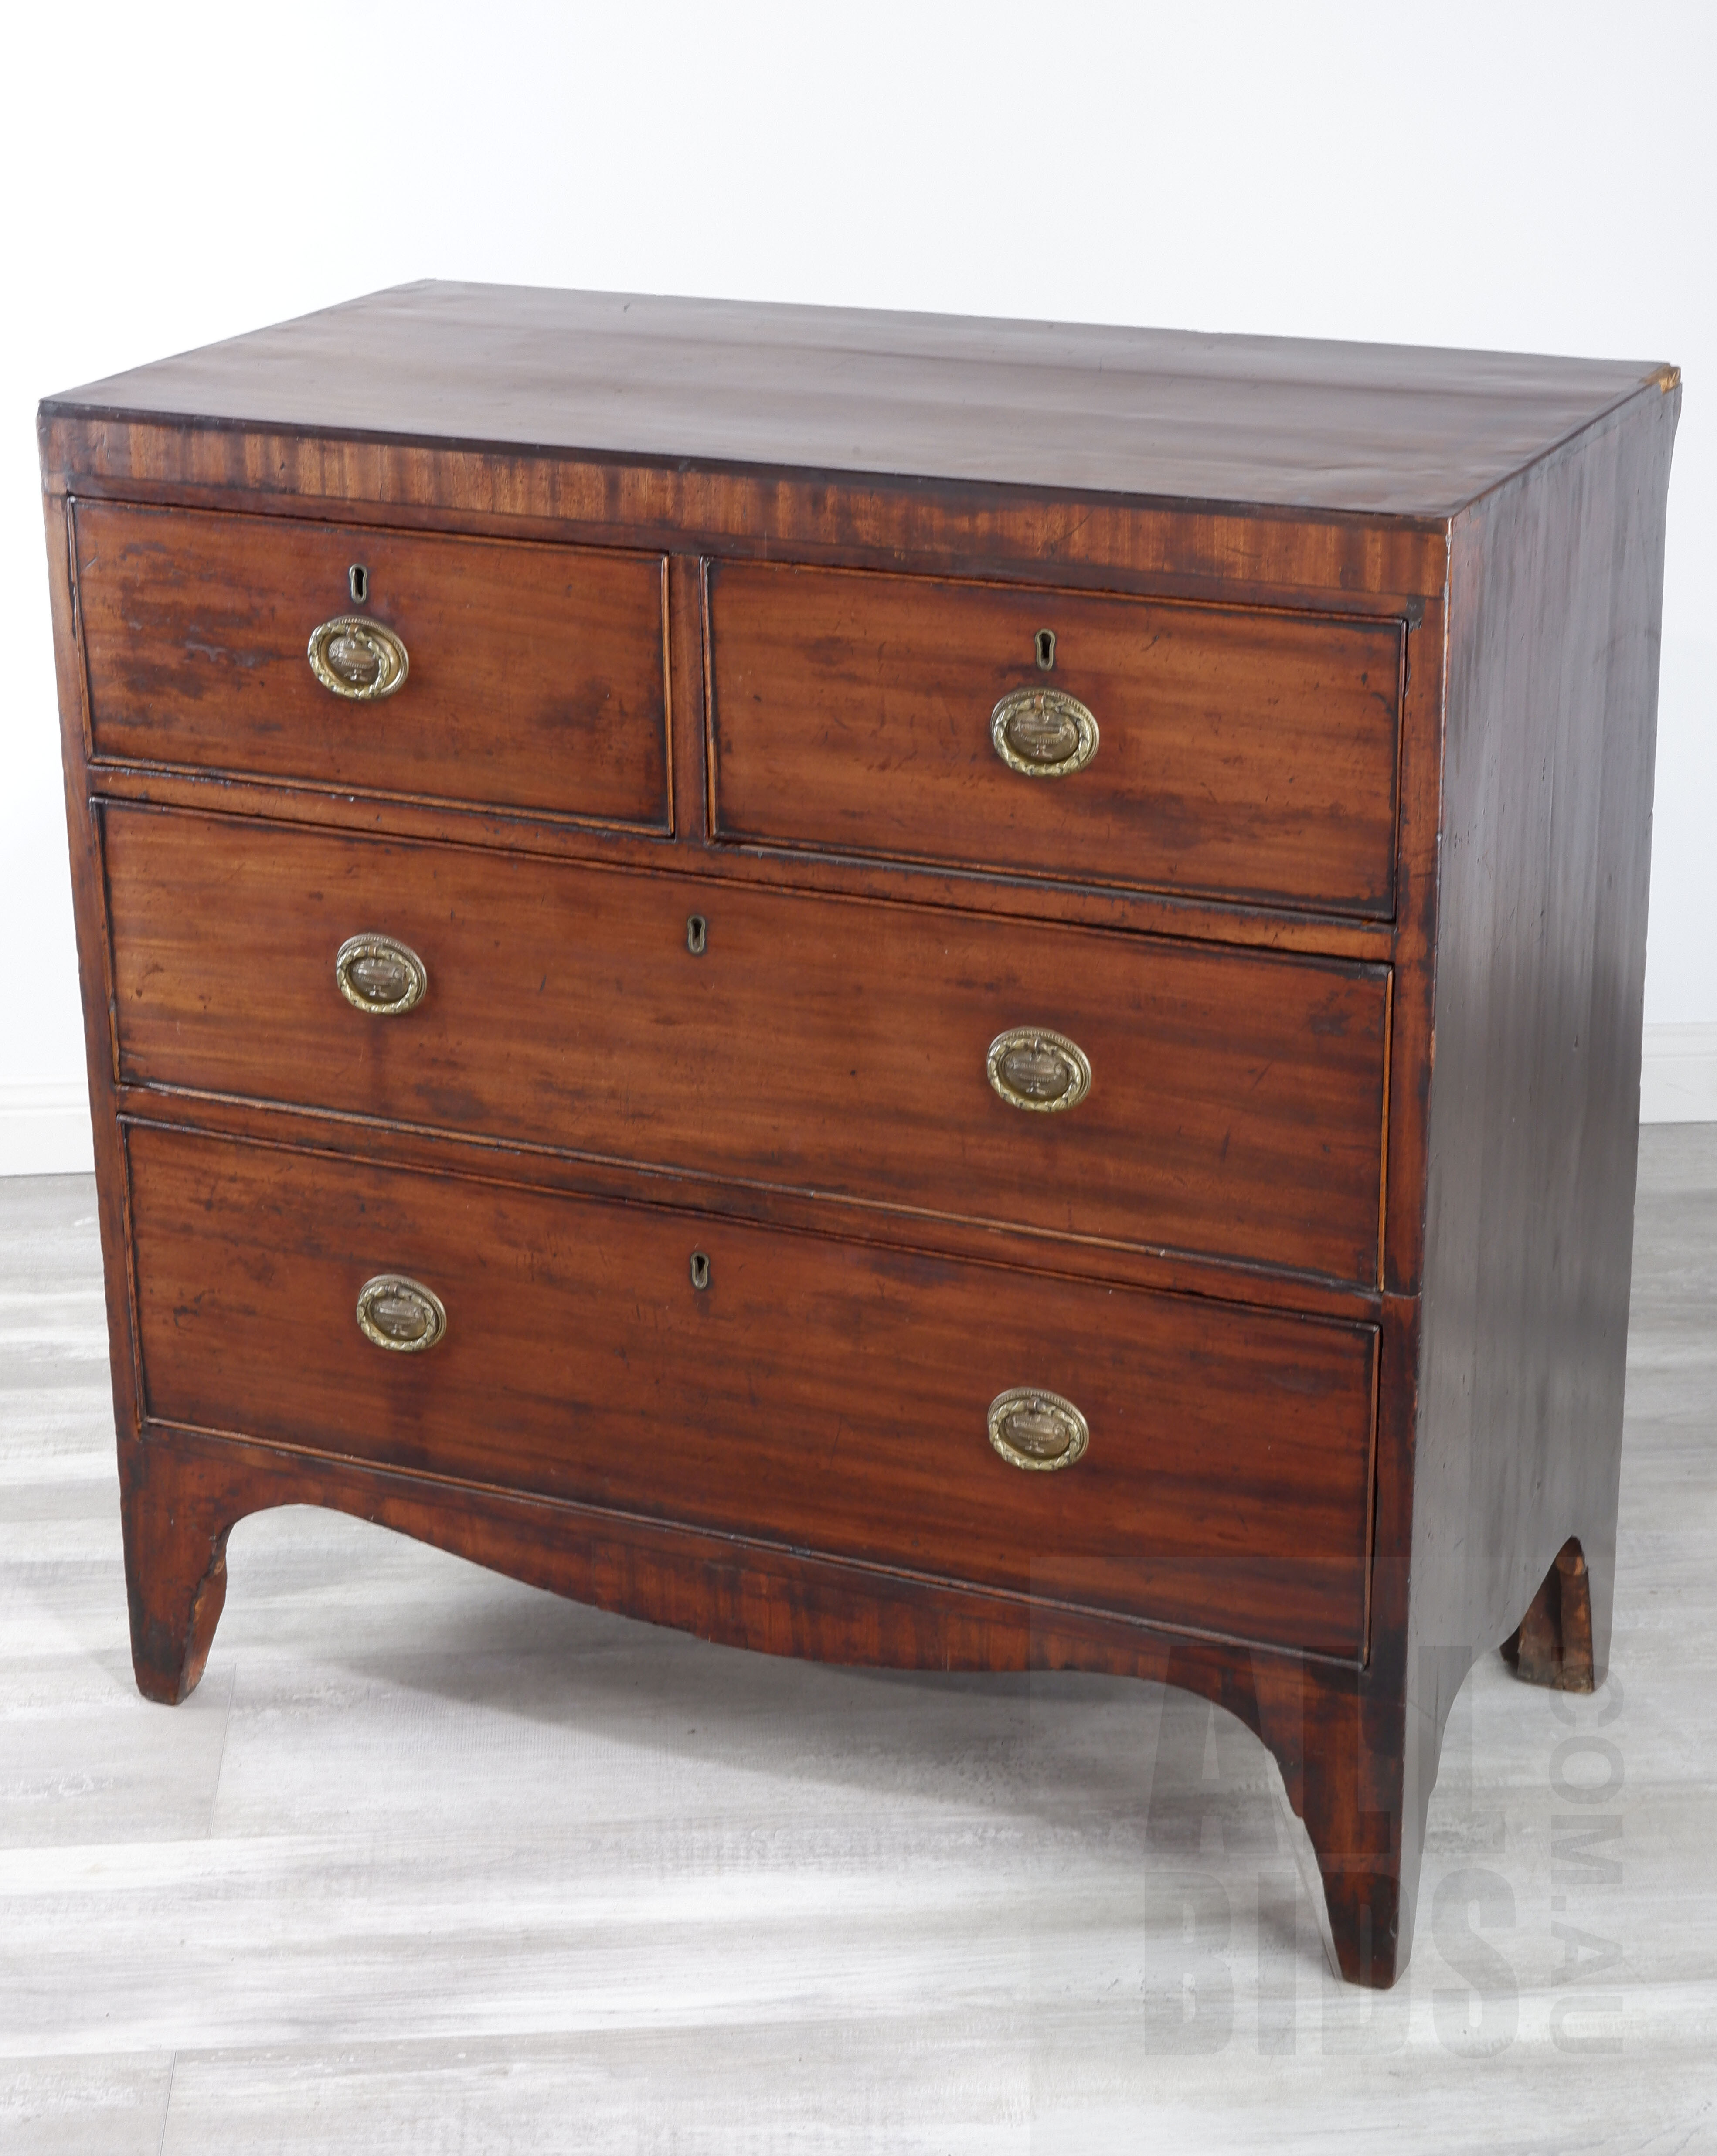 'George III Mahogany Chest of Drawers, Early to Mid 19th Century'